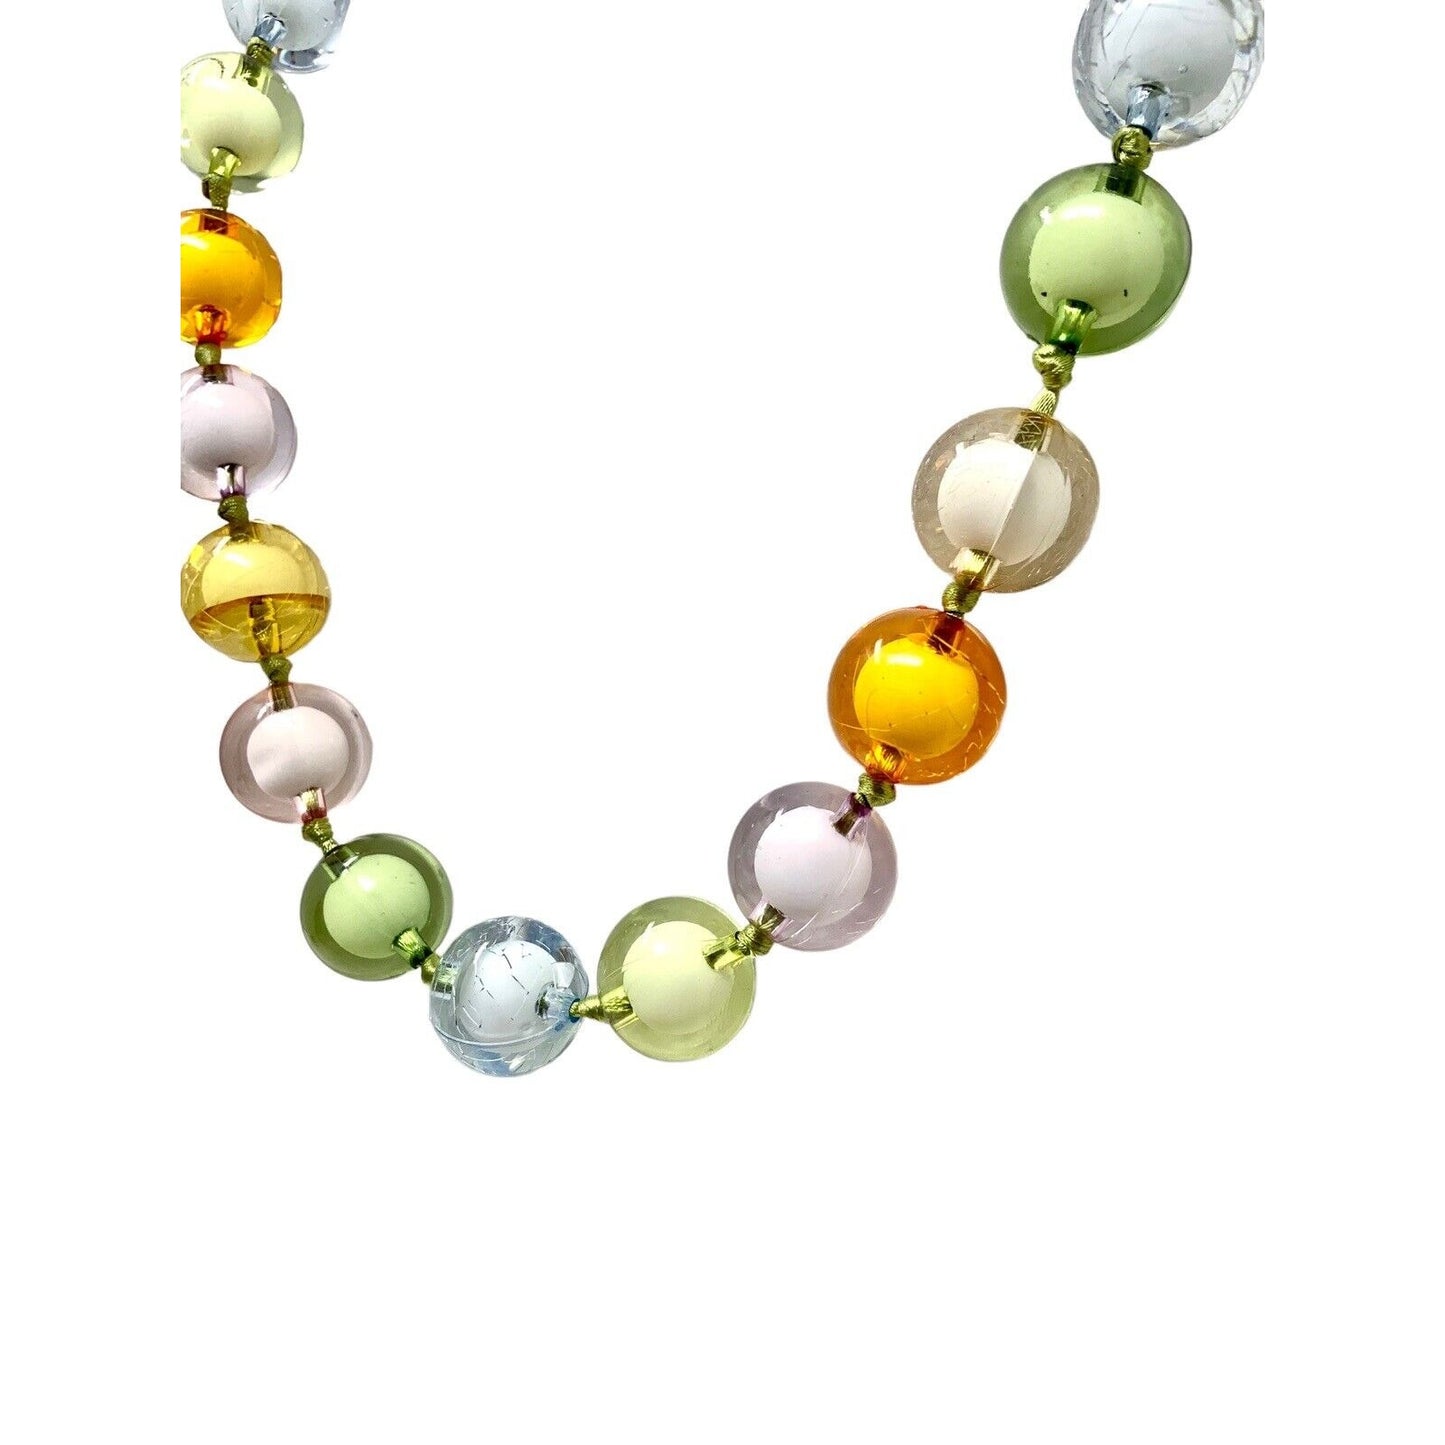 Multi Colored Pastel Glass Beaded Necklace with Ribbon Tie